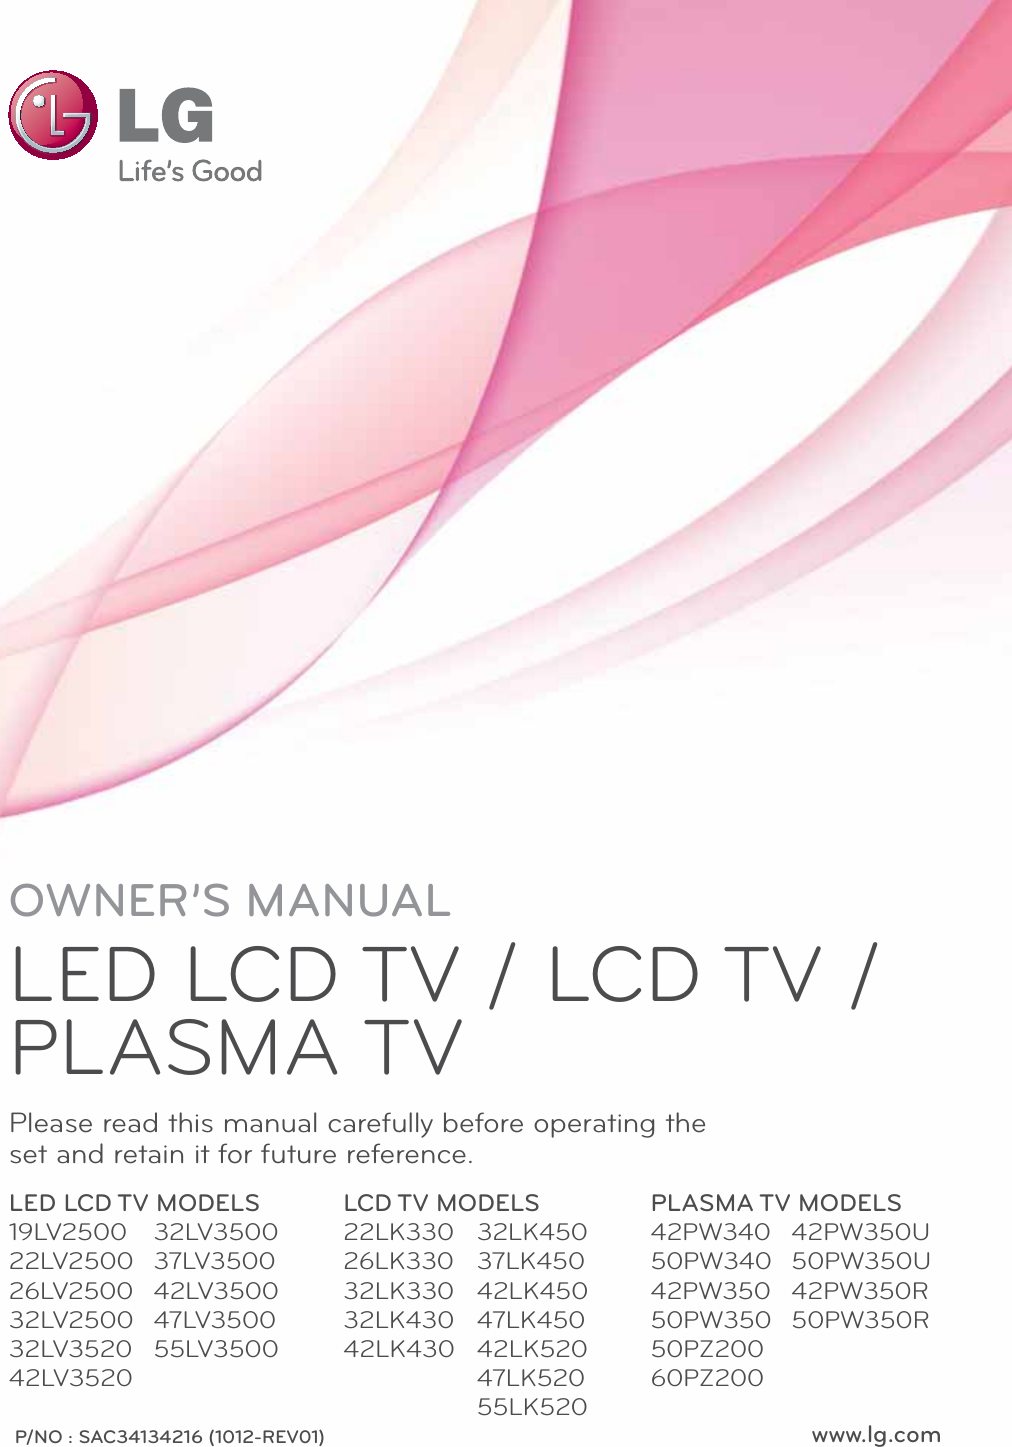 www.lg.comP/NO : SAC34134216 (1012-REV01)OWNER’S MANUALLED LCD TV / LCD TV / PLASMA TVPlease read this manual carefully before operating the set and retain it for future reference.LED LCD TV MODELS19LV250022LV250026LV250032LV250032LV352042LV3520LCD TV MODELS22LK33026LK33032LK33032LK43042LK430PLASMA TV MODELS42PW34050PW34042PW35050PW35050PZ20060PZ20032LV350037LV350042LV350047LV350055LV350032LK45037LK45042LK45047LK45042LK52047LK52055LK52042PW350U50PW350U42PW350R50PW350R